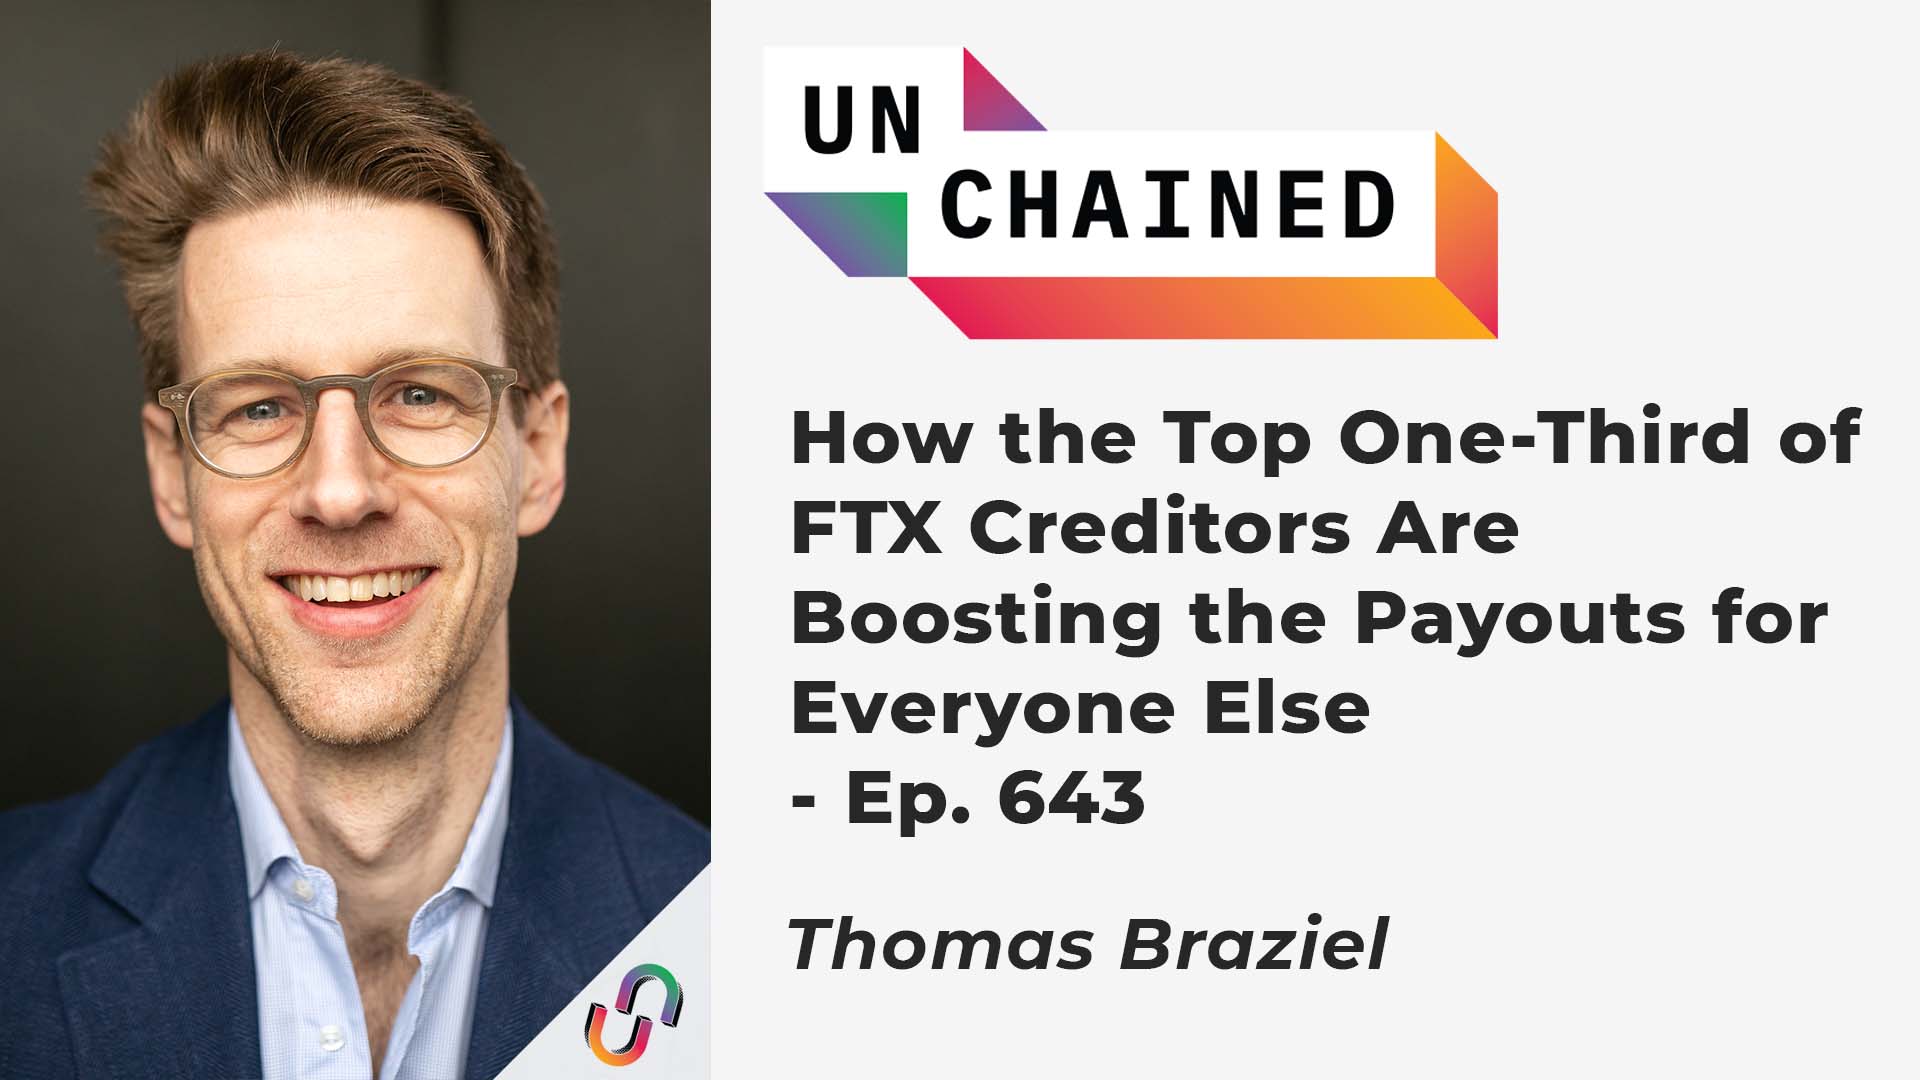 How the Top One-Third of FTX Creditors Are Boosting the Payouts for Everyone Else